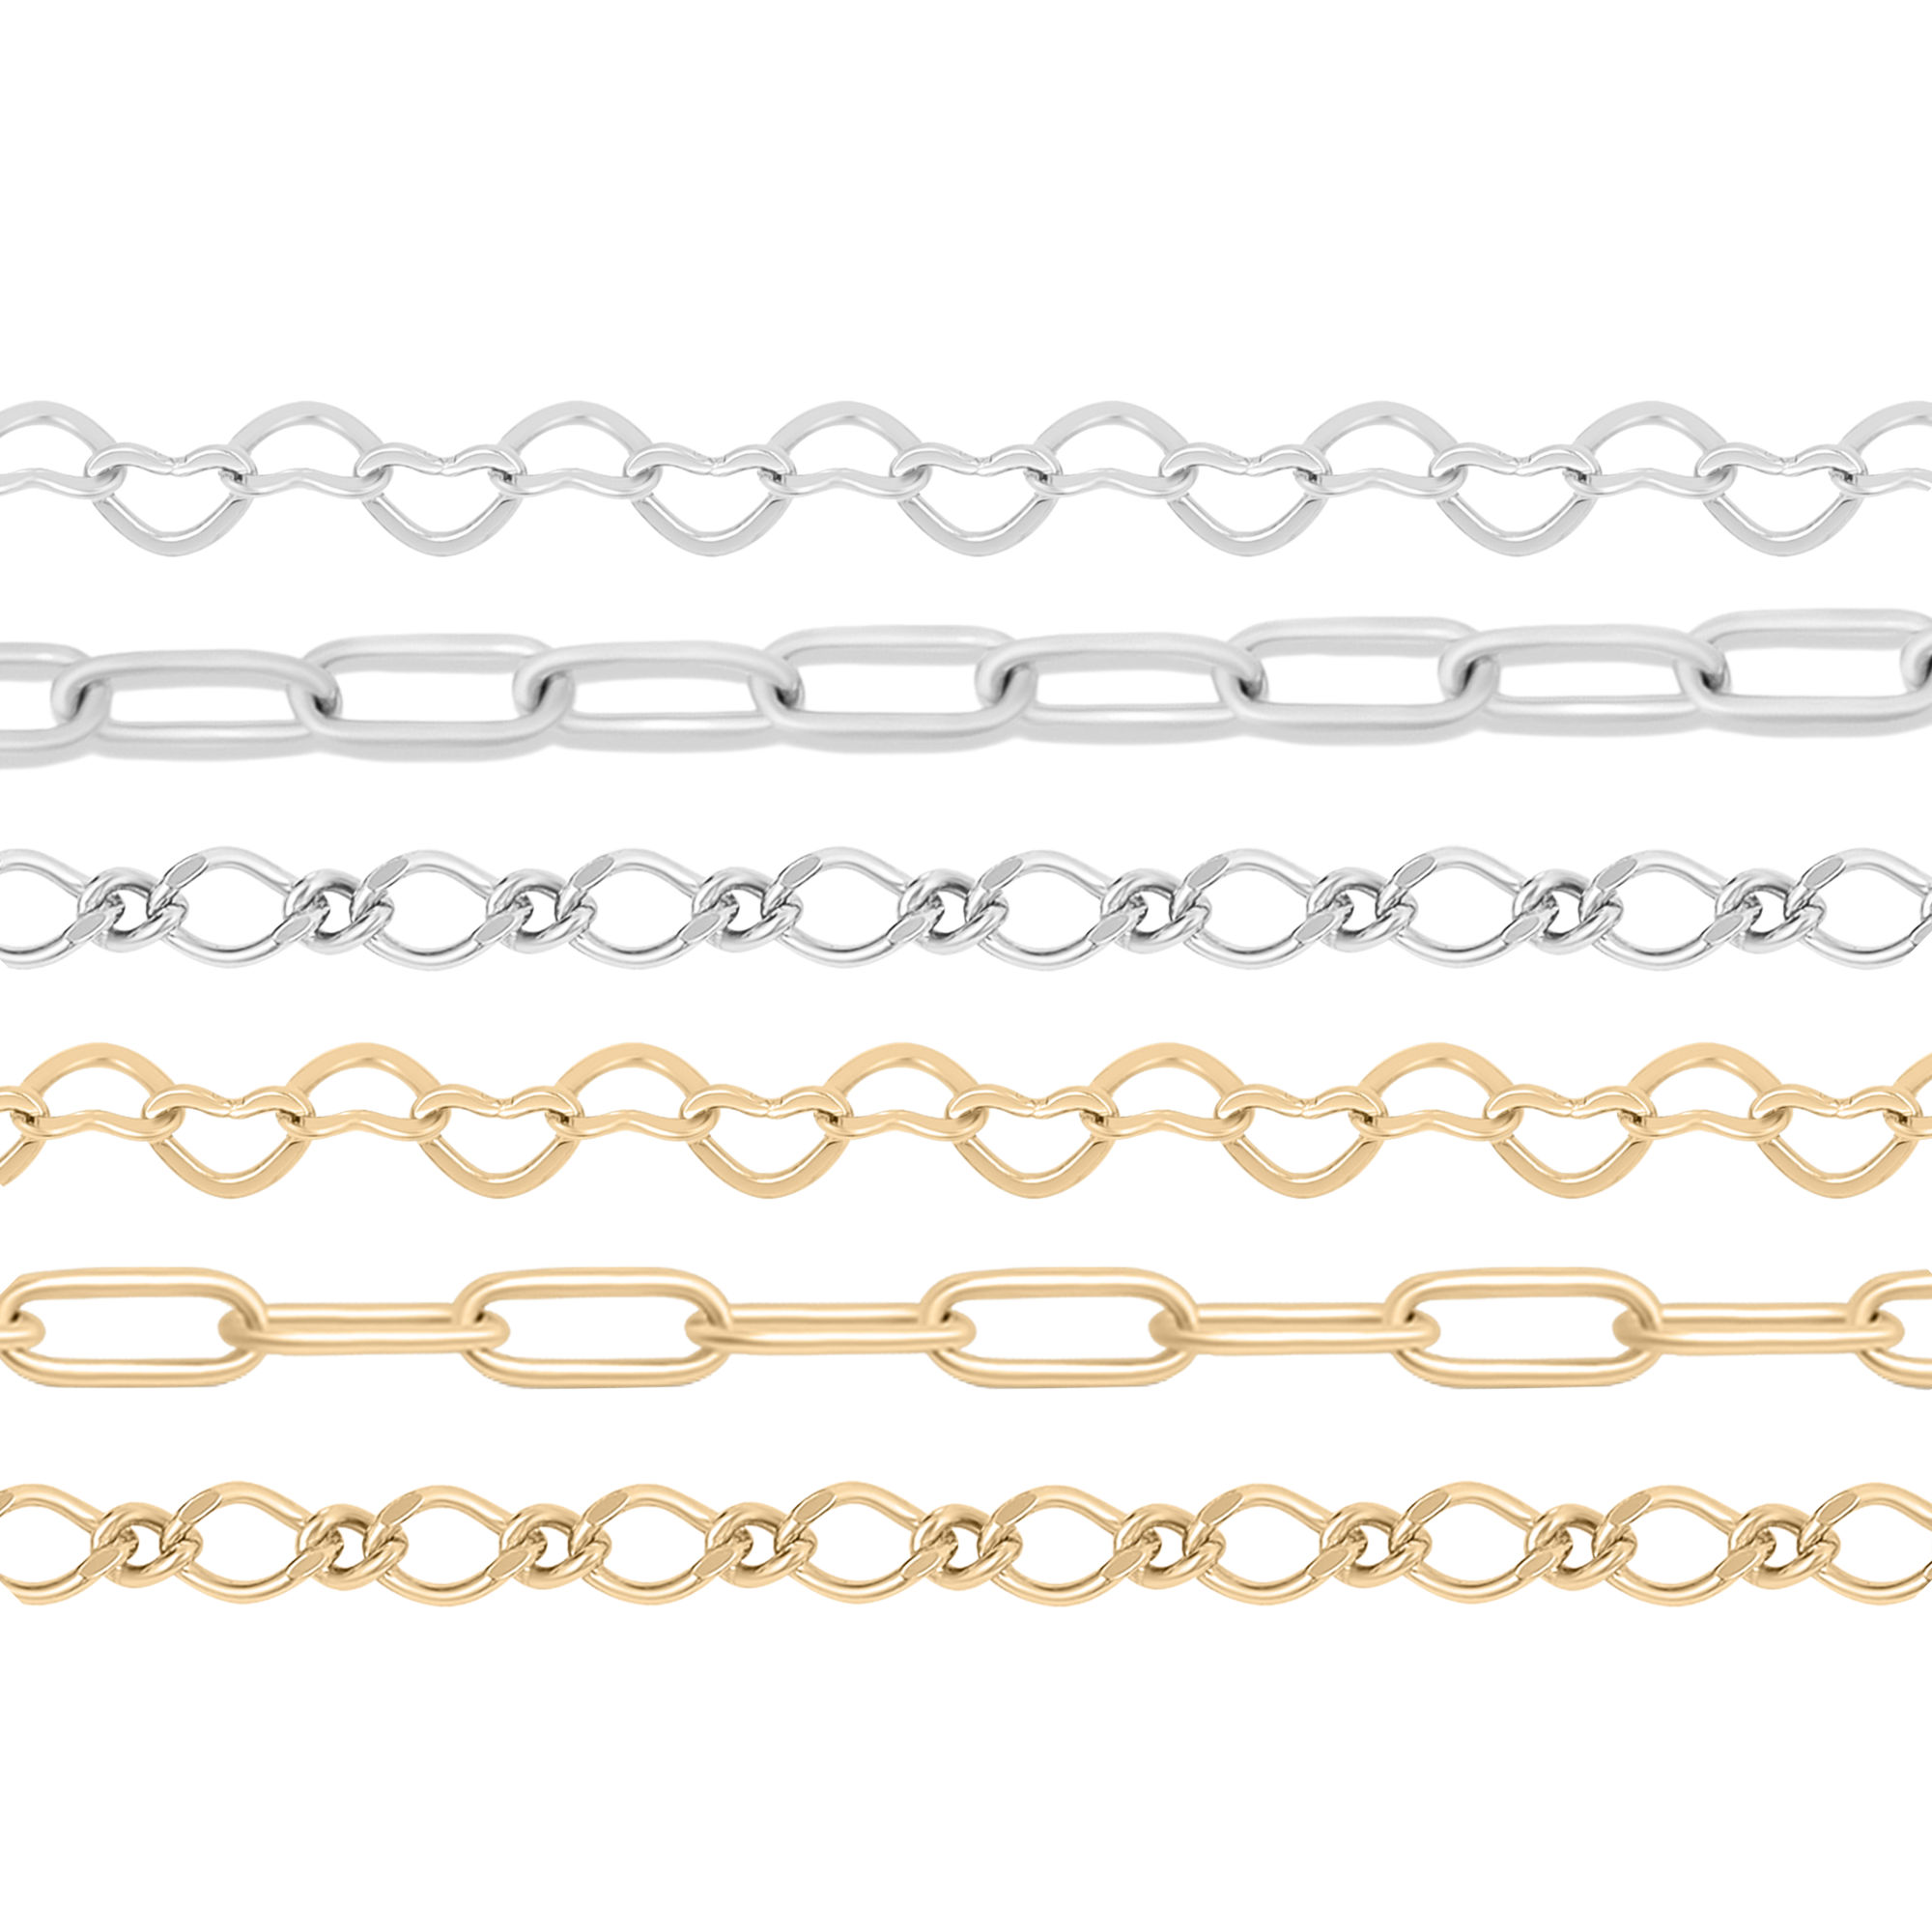 Permanent Jewelry Chain Starter Kit - 3 Chain Style Pack - Sterling Silver & Gold Plated Sterling Silver Chains